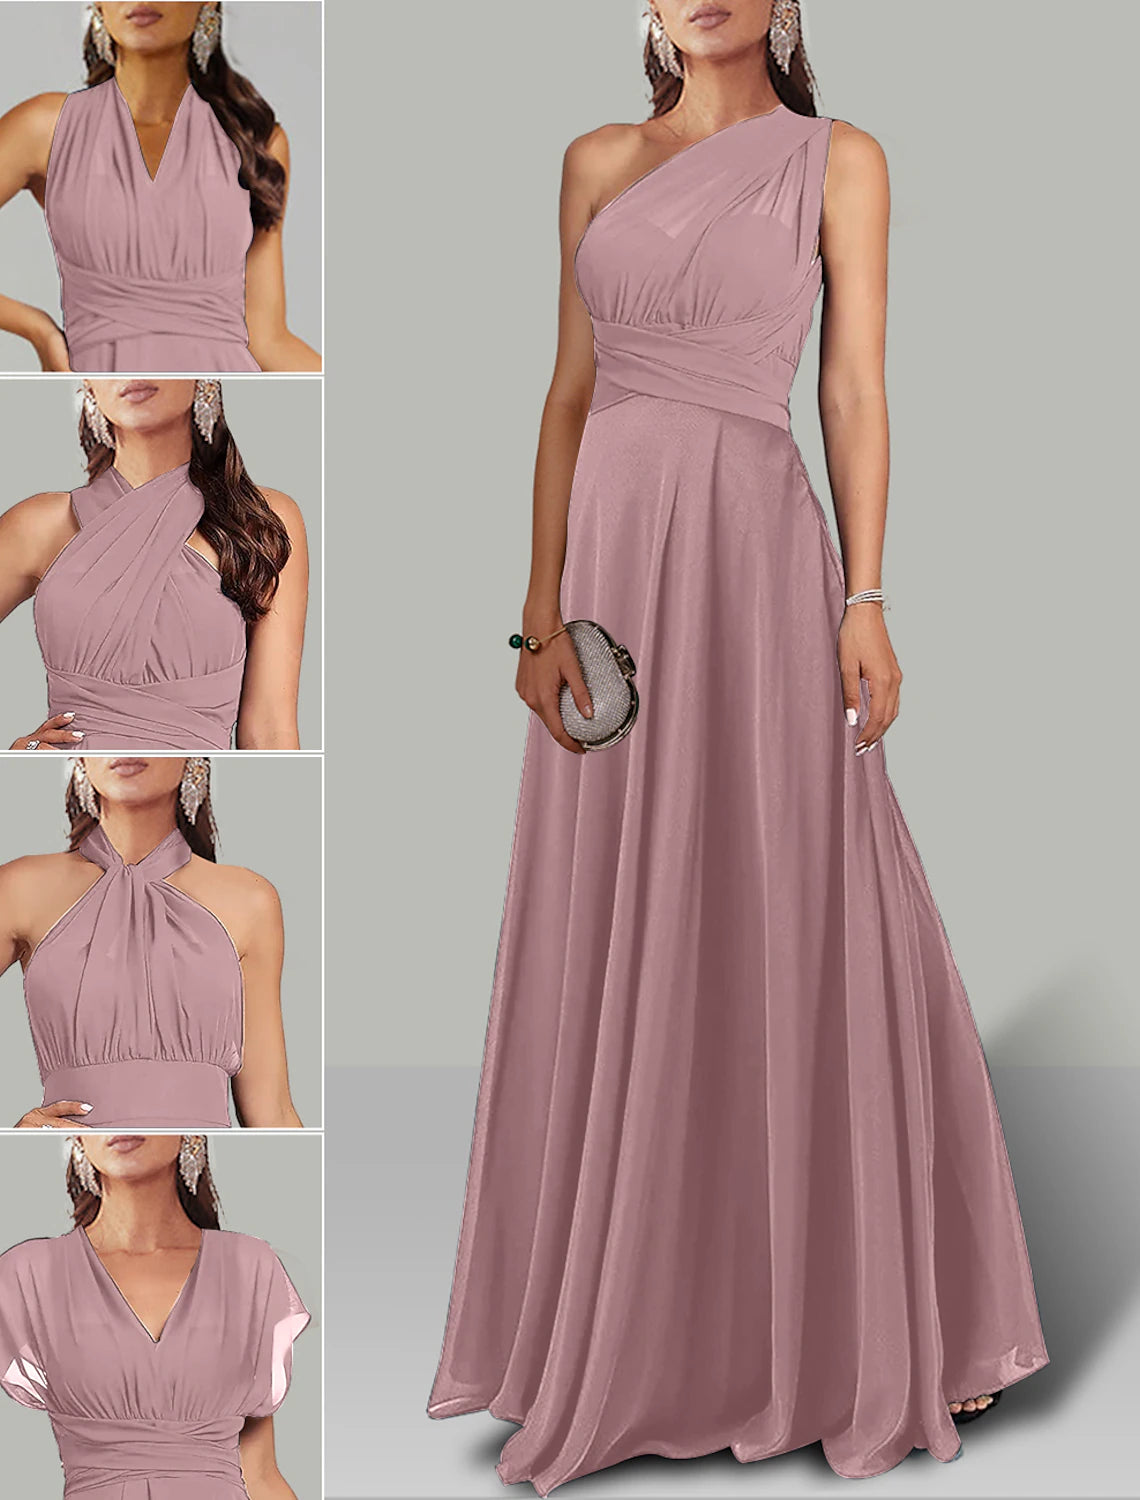 A-Line Wedding Guest Dresses Infinity Dress Wedding Party Floor Length Short Sleeve Halter Neck Convertible Chiffon with Ruched